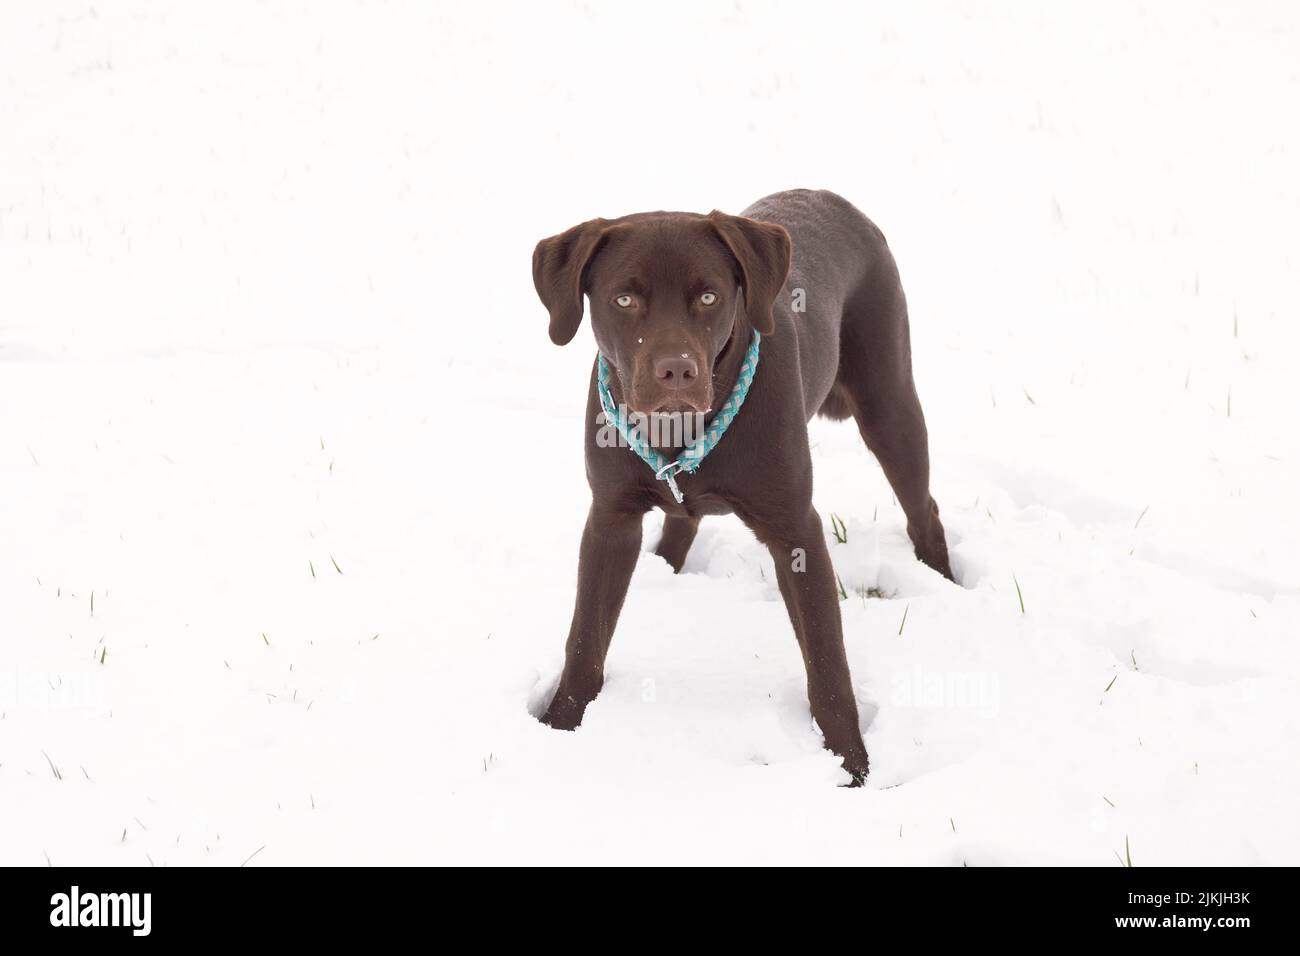 A brown lobrador dog standing in a snow-covered field Stock Photo